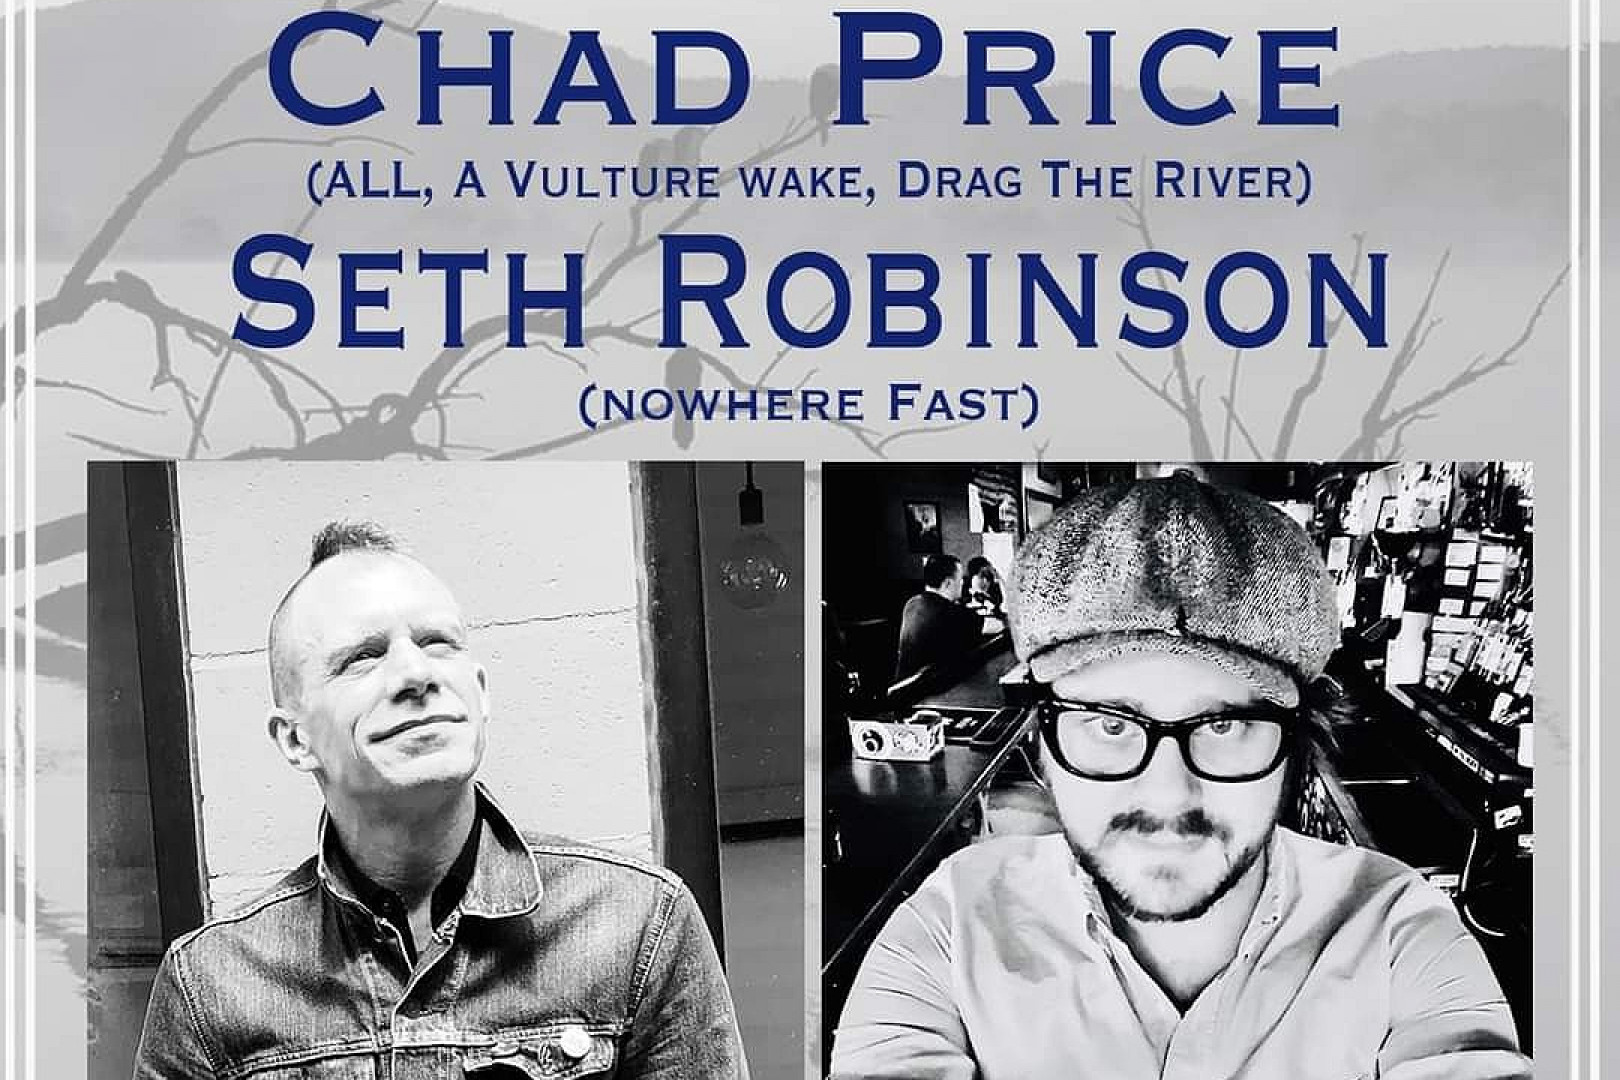 Chad Price/Seth Robinson (East and South East)